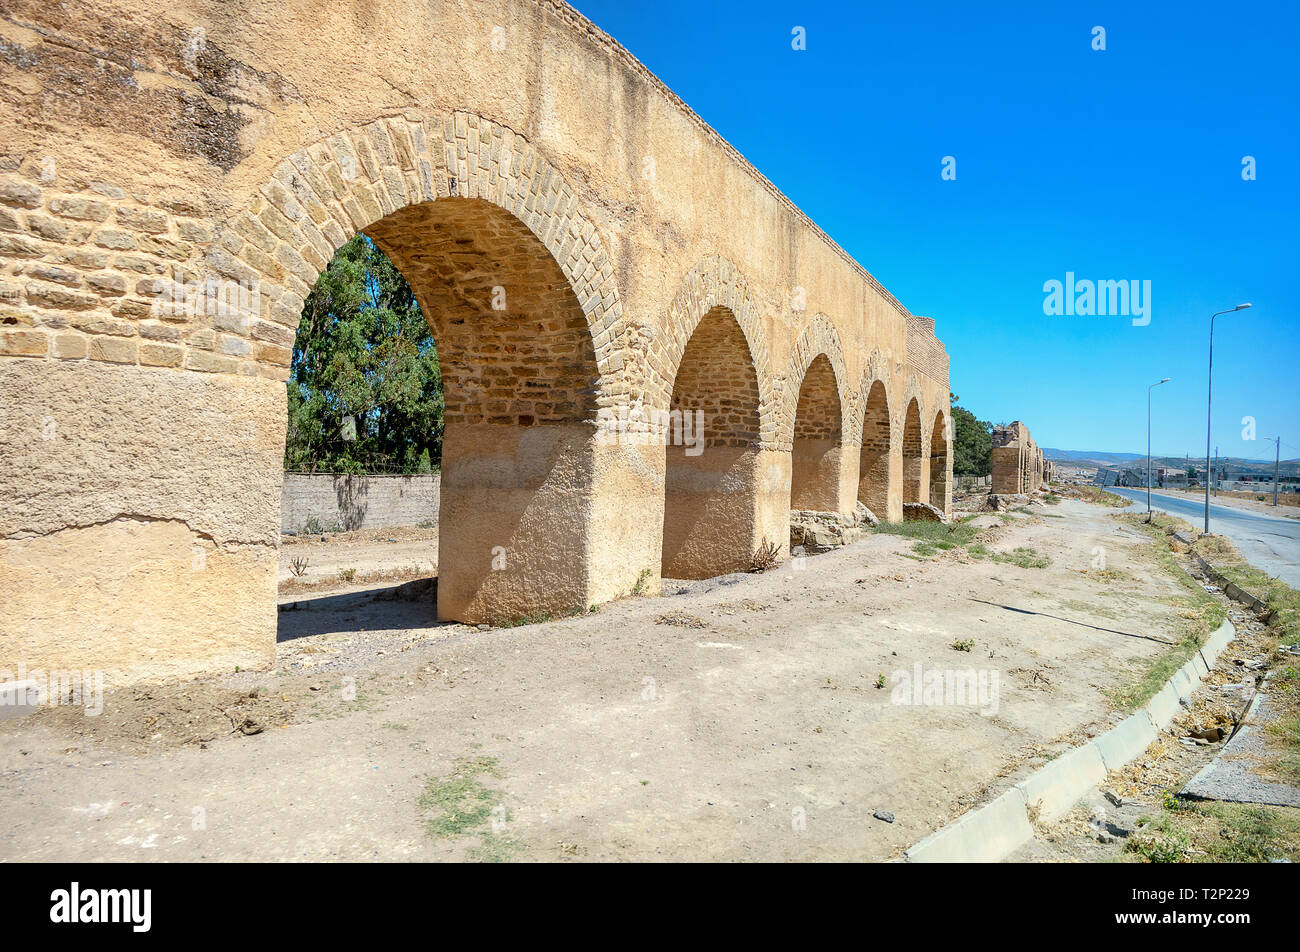 Ruins of ancient aqueduct along road near roman town Uthina (Oudhna). Tunisia, North Africa Stock Photo